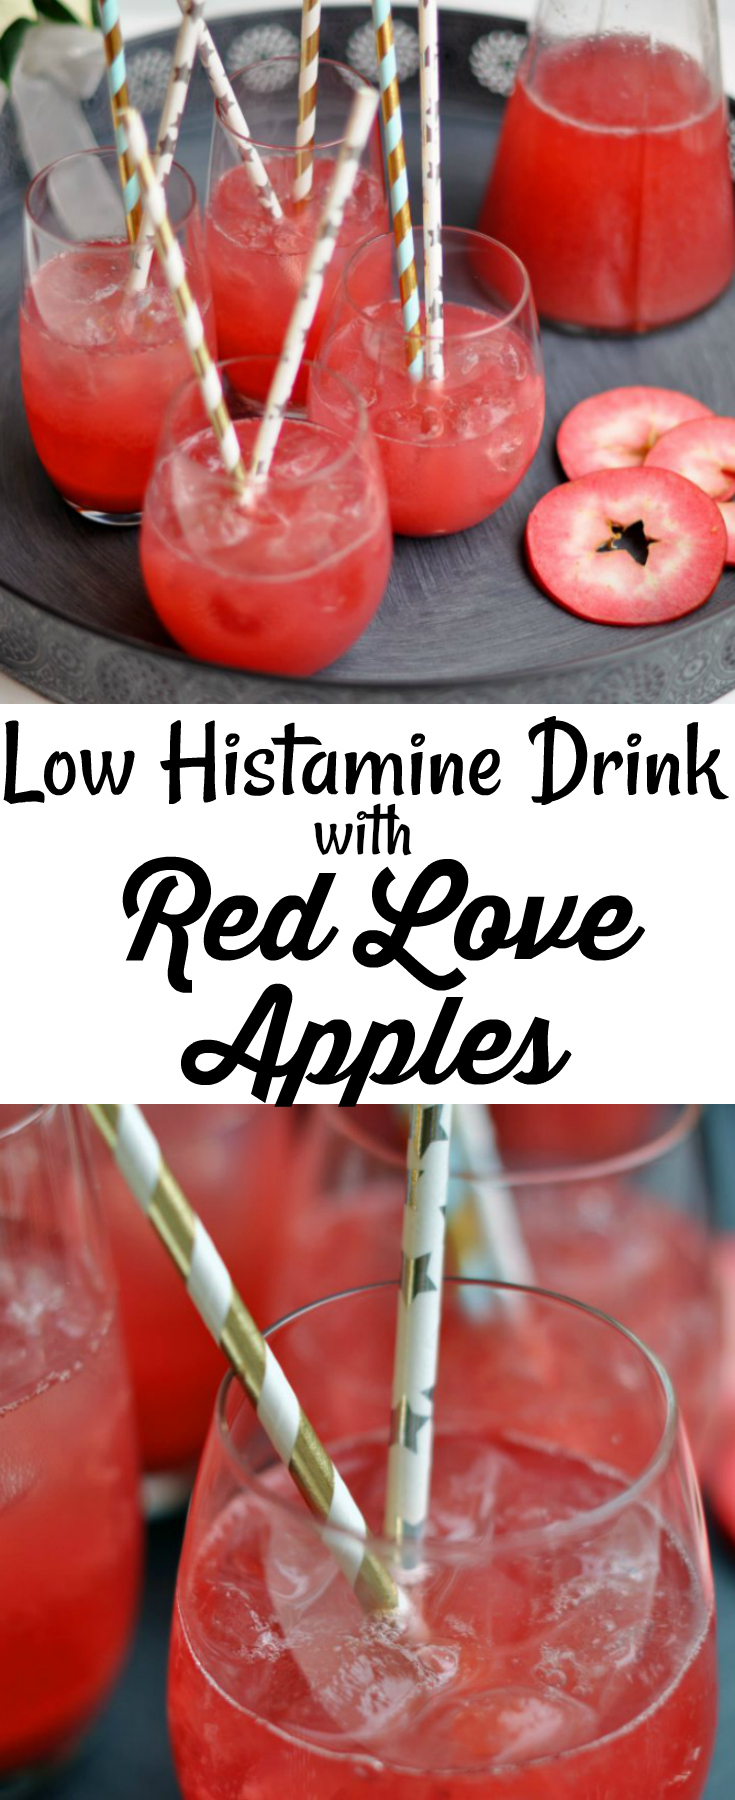 Low Histamine Drink with Red Love Apples - Pin me!